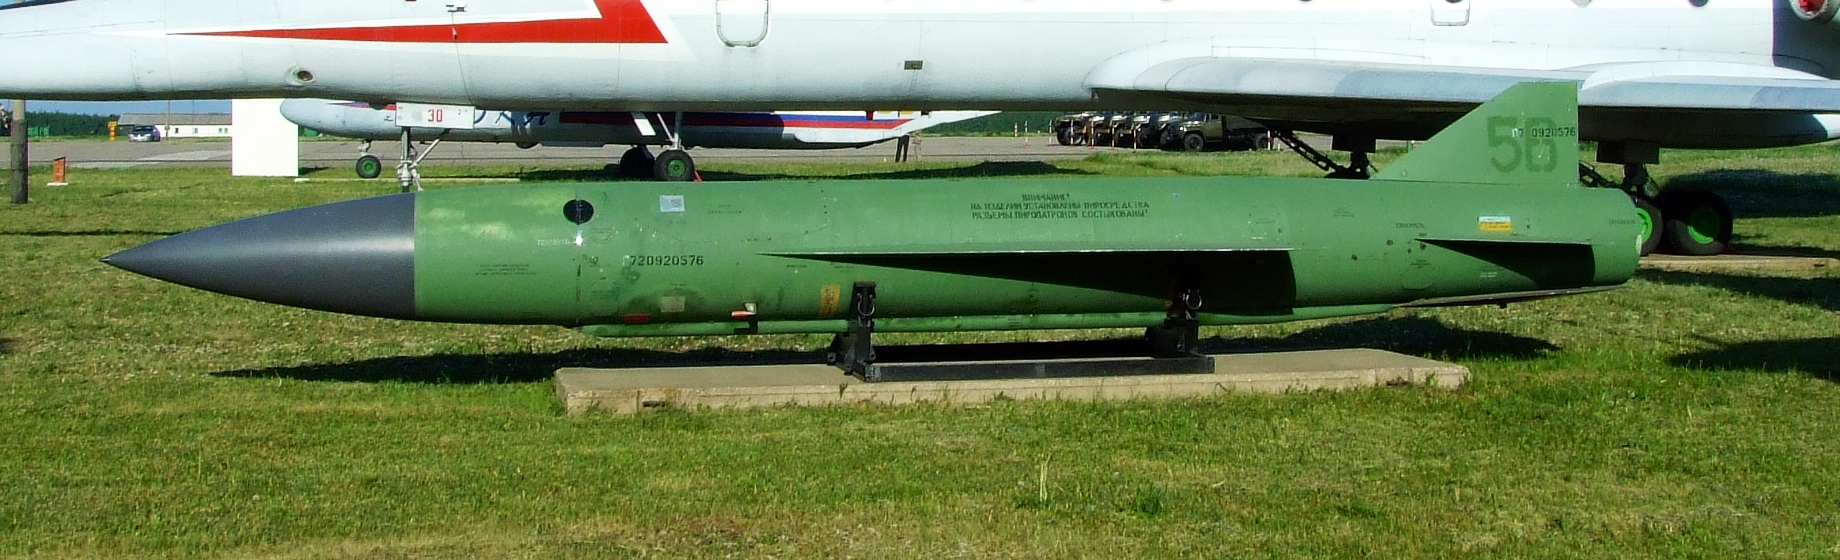 Kh-22 missile (Wikimedia Commons)